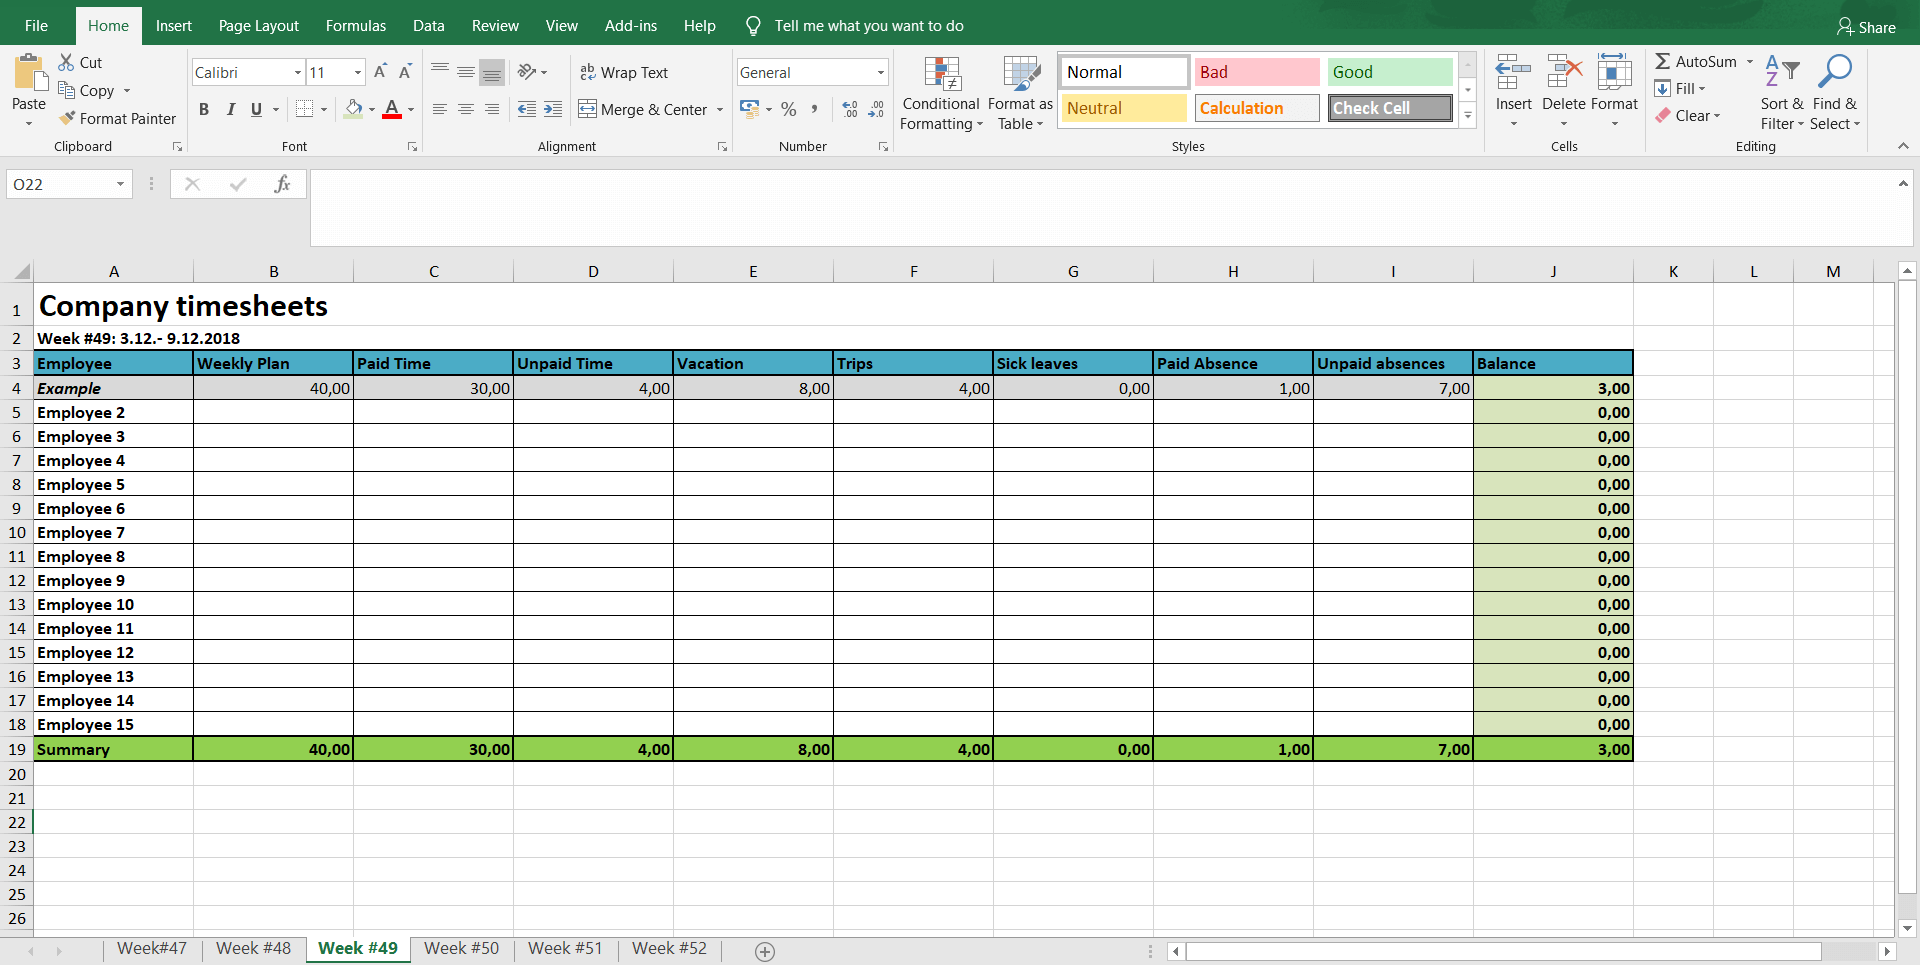 Employee Monthly Work Schedule Template from allhours.com